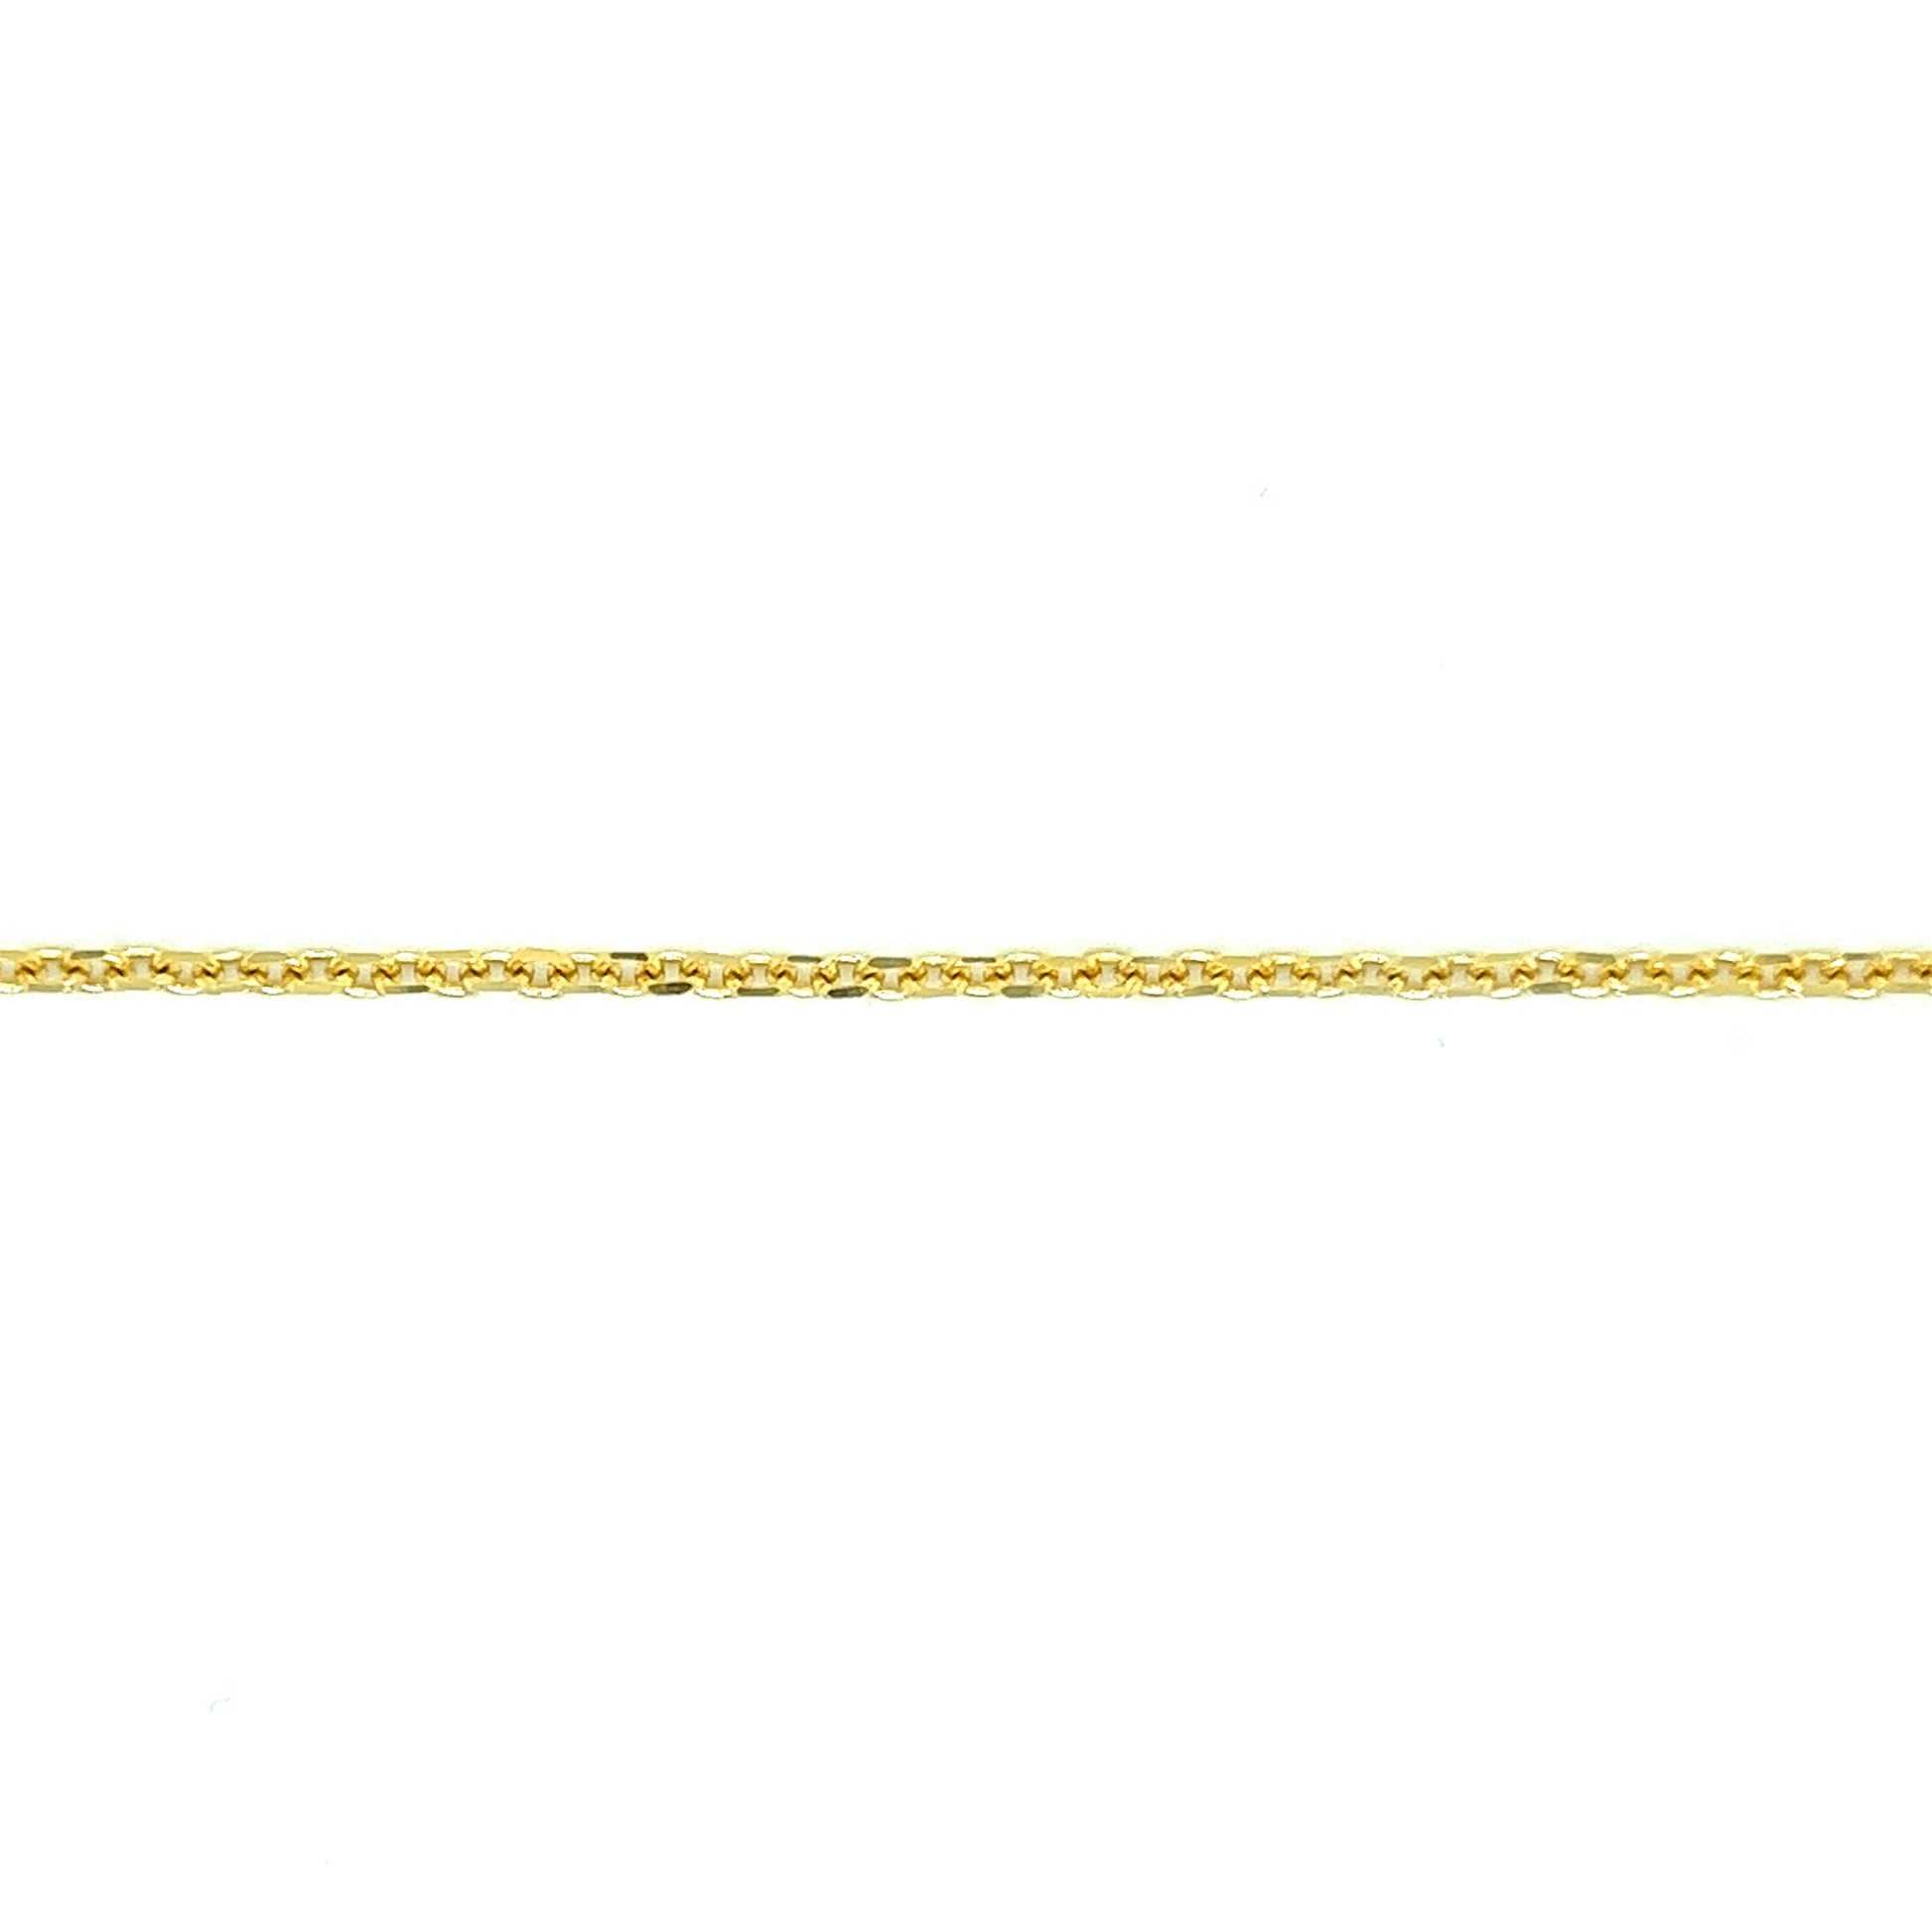 Cable Chain 1.8mm in 14K Yellow Gold Chain View